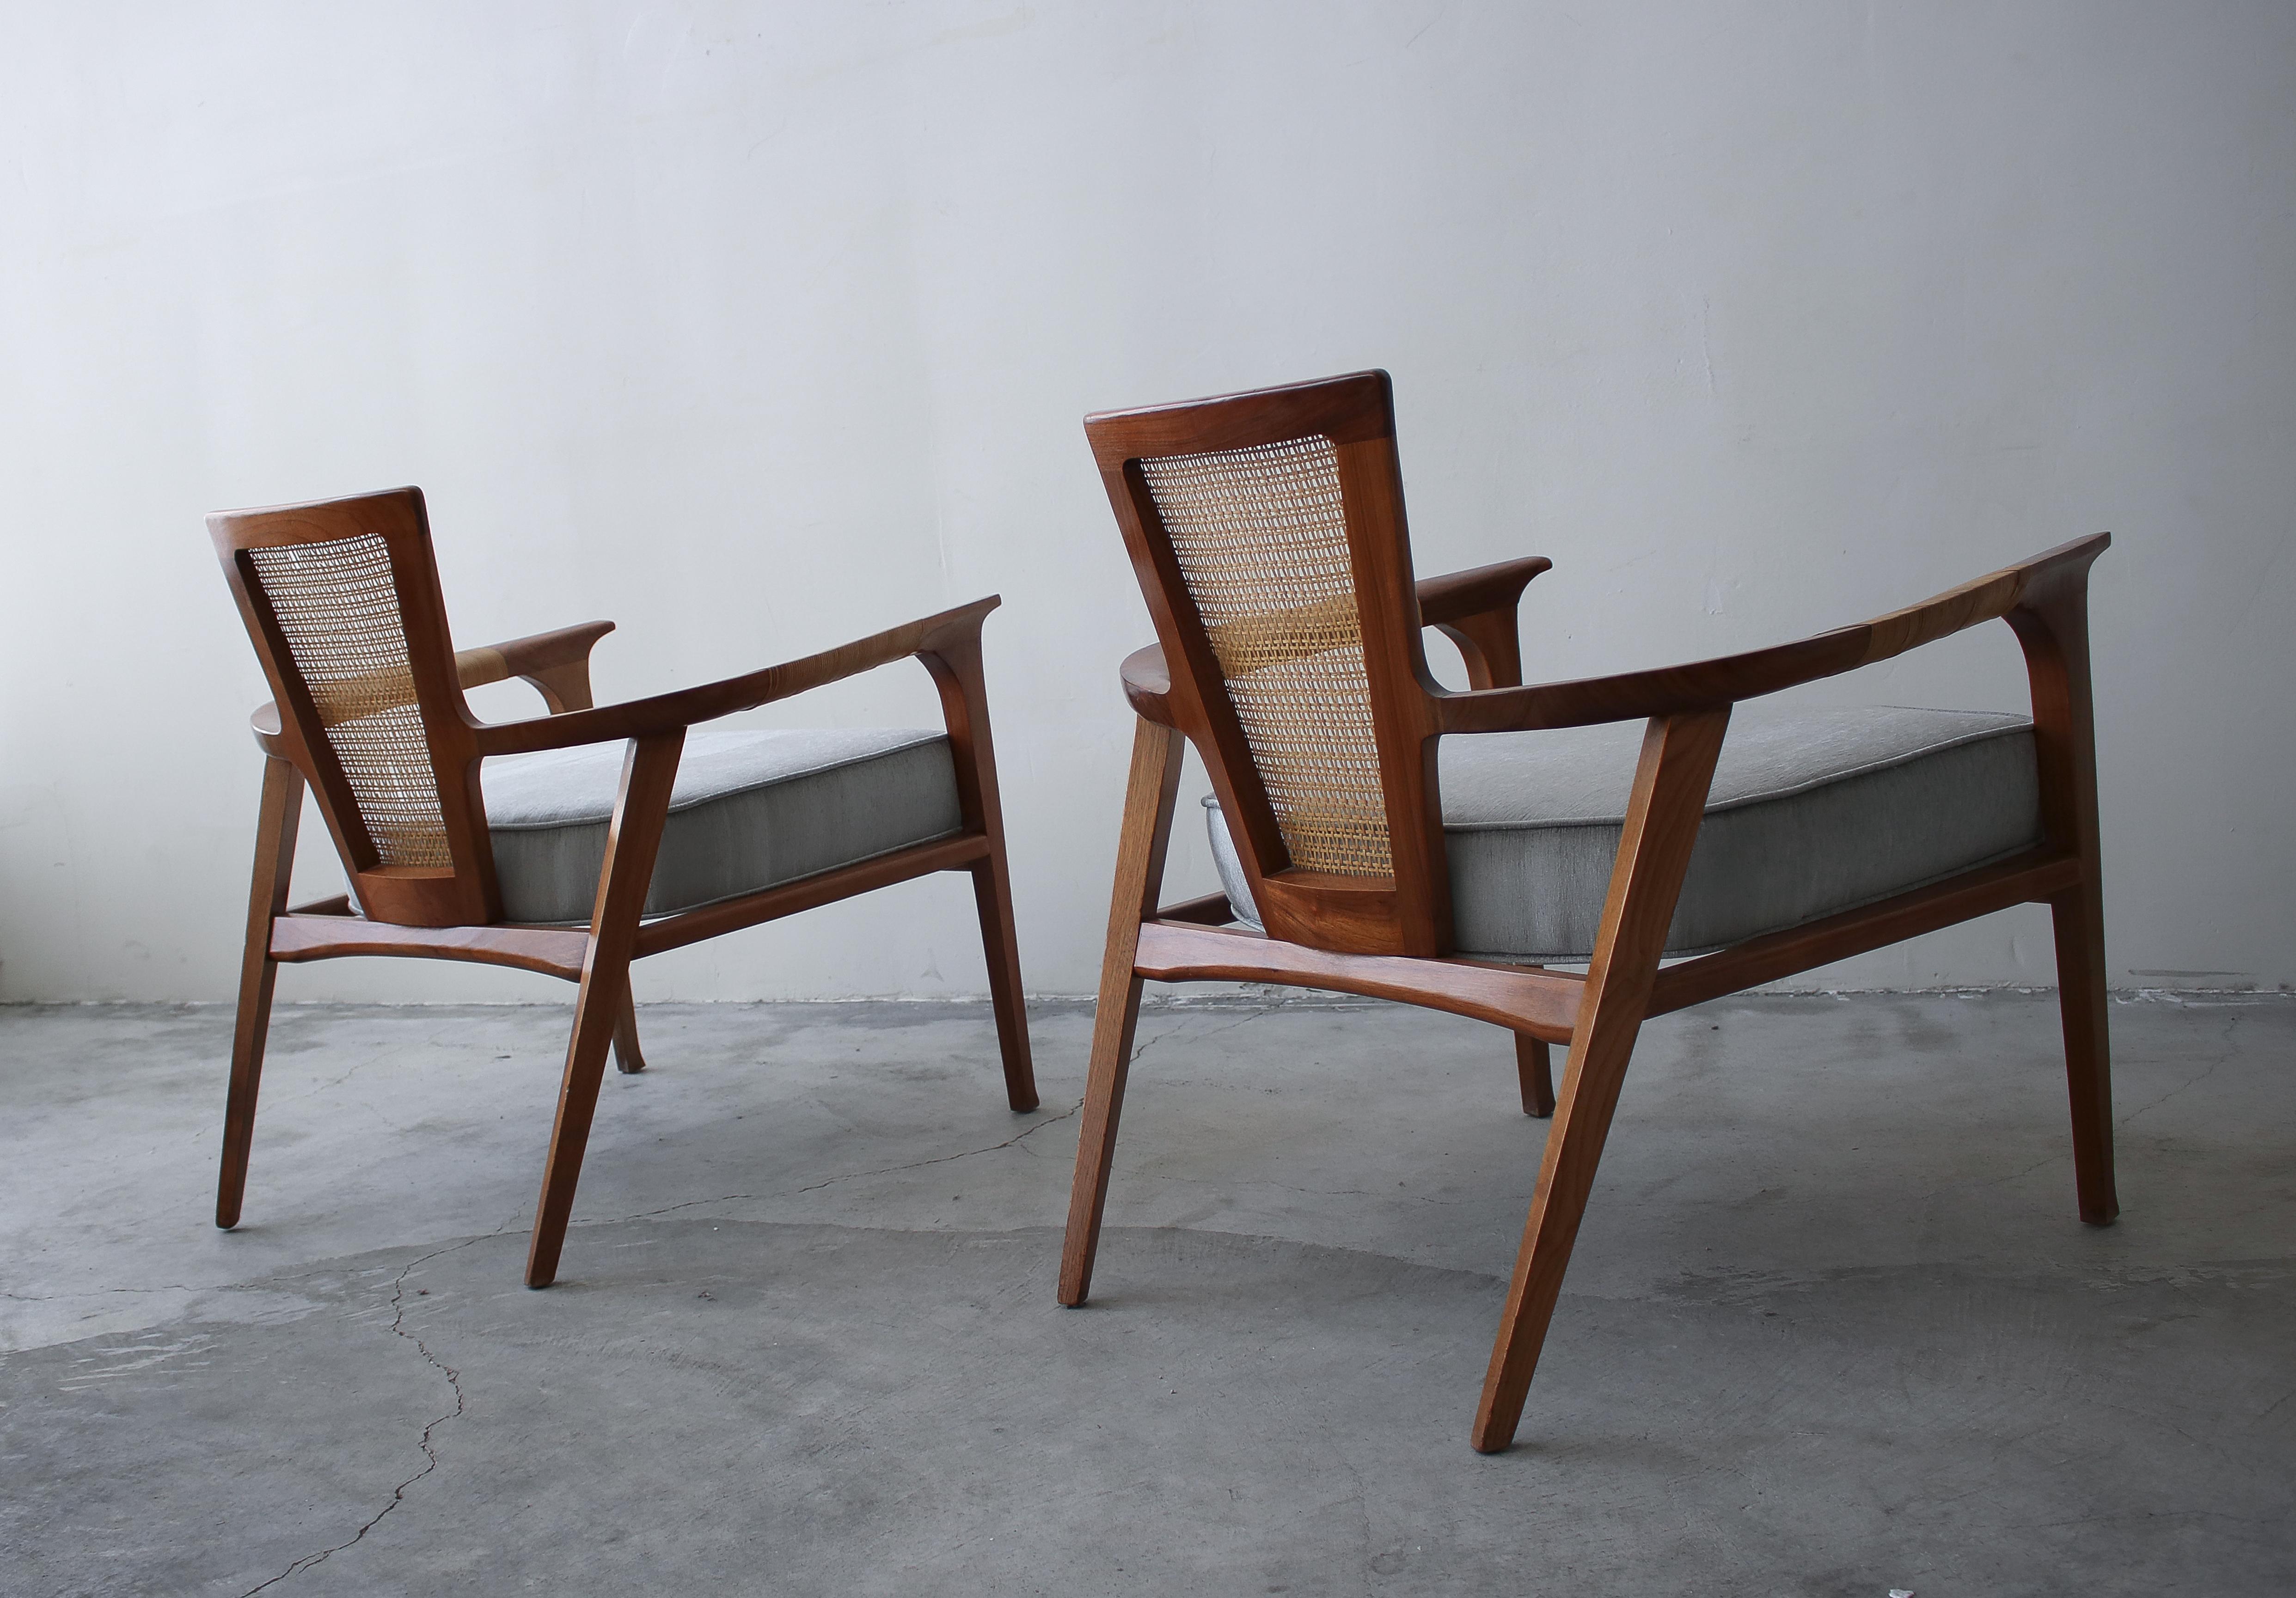 20th Century Pair of Midcentury Walnut and Cane Lounge Chairs by William Hinn